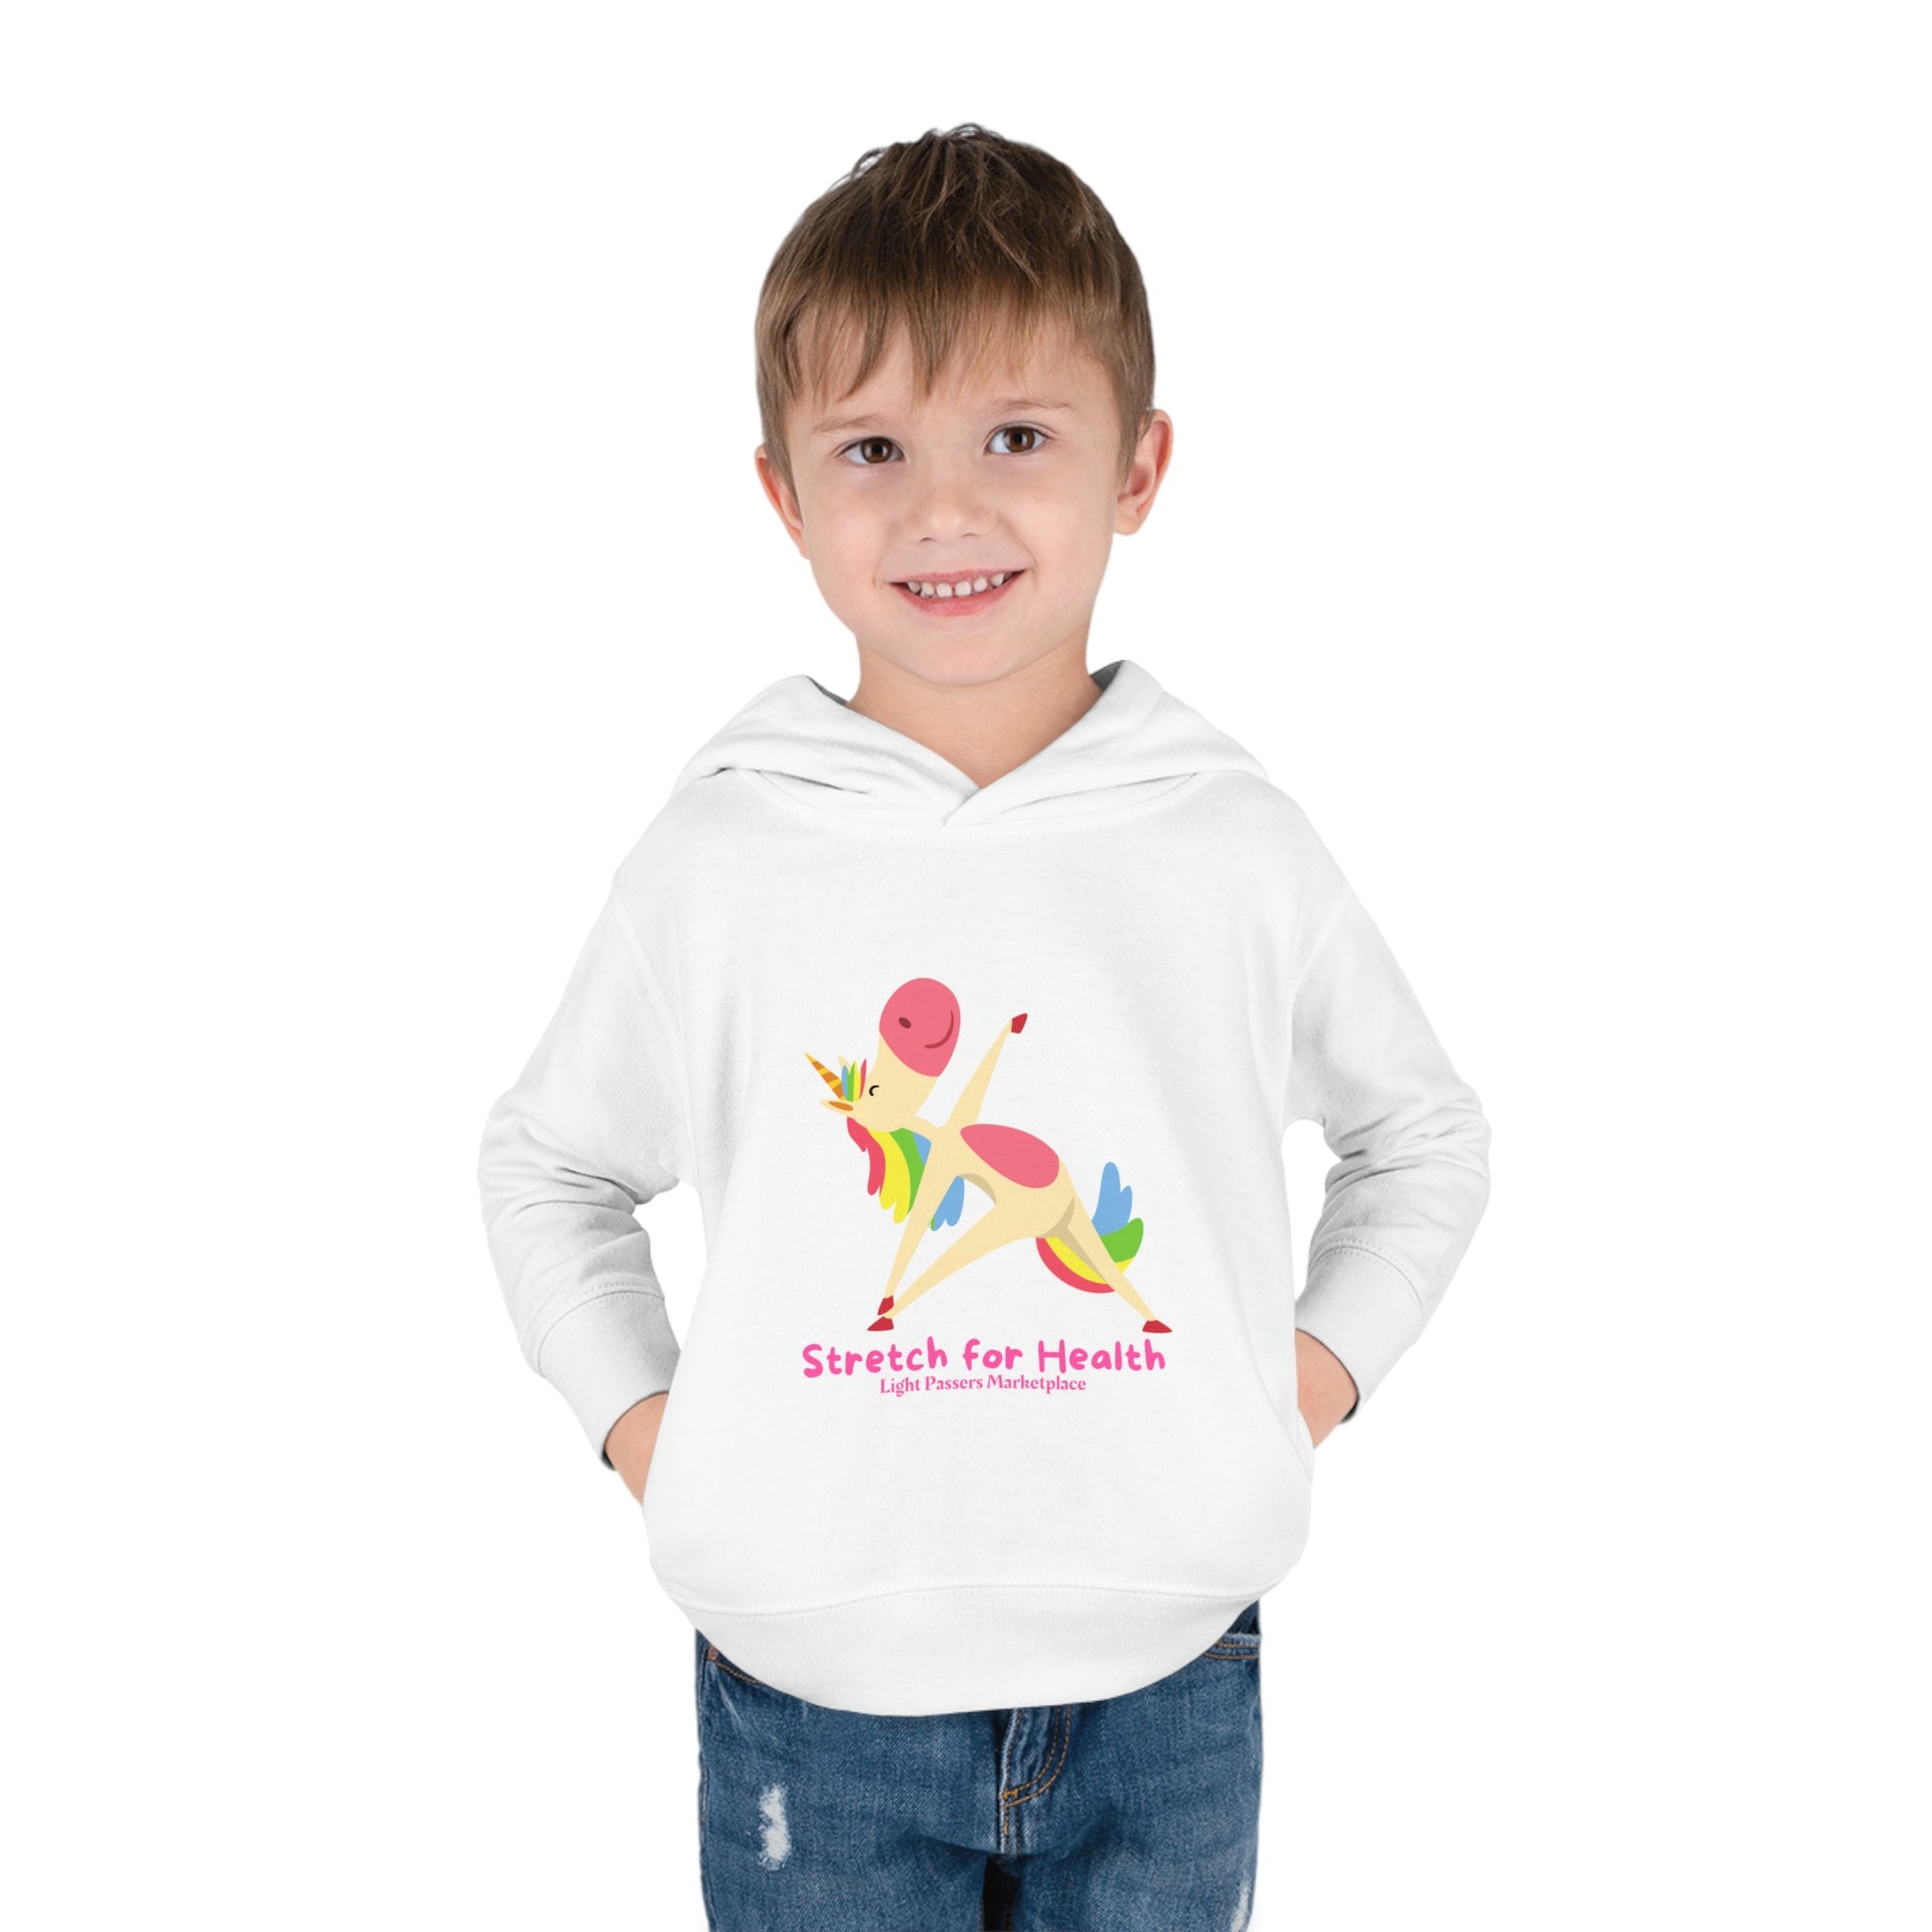 A smiling toddler in a Rabbit Skins Unicorn Stretch Toddler Hooded Sweatshirt with side seam pockets, jersey-lined hood, and cover-stitched details for durability and comfort.